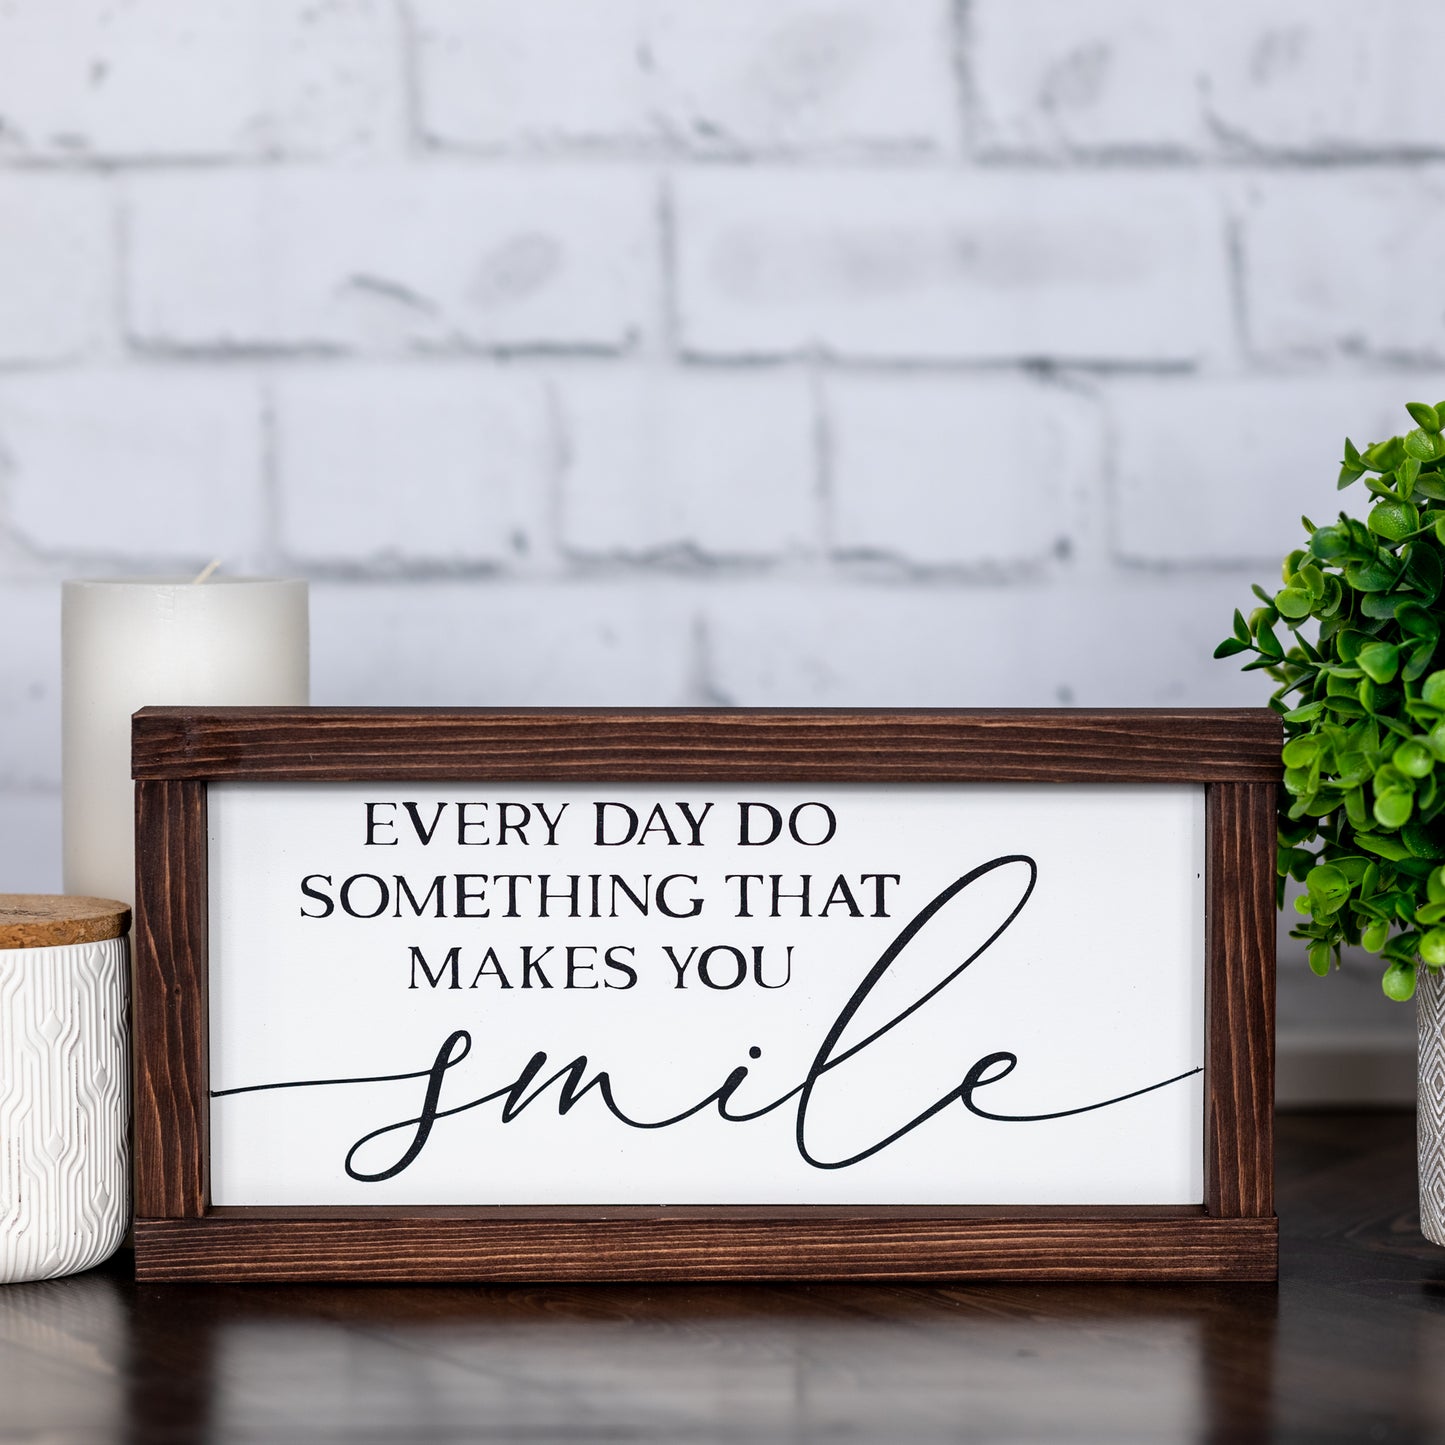 every day do something that makes you smile ~ wood sign